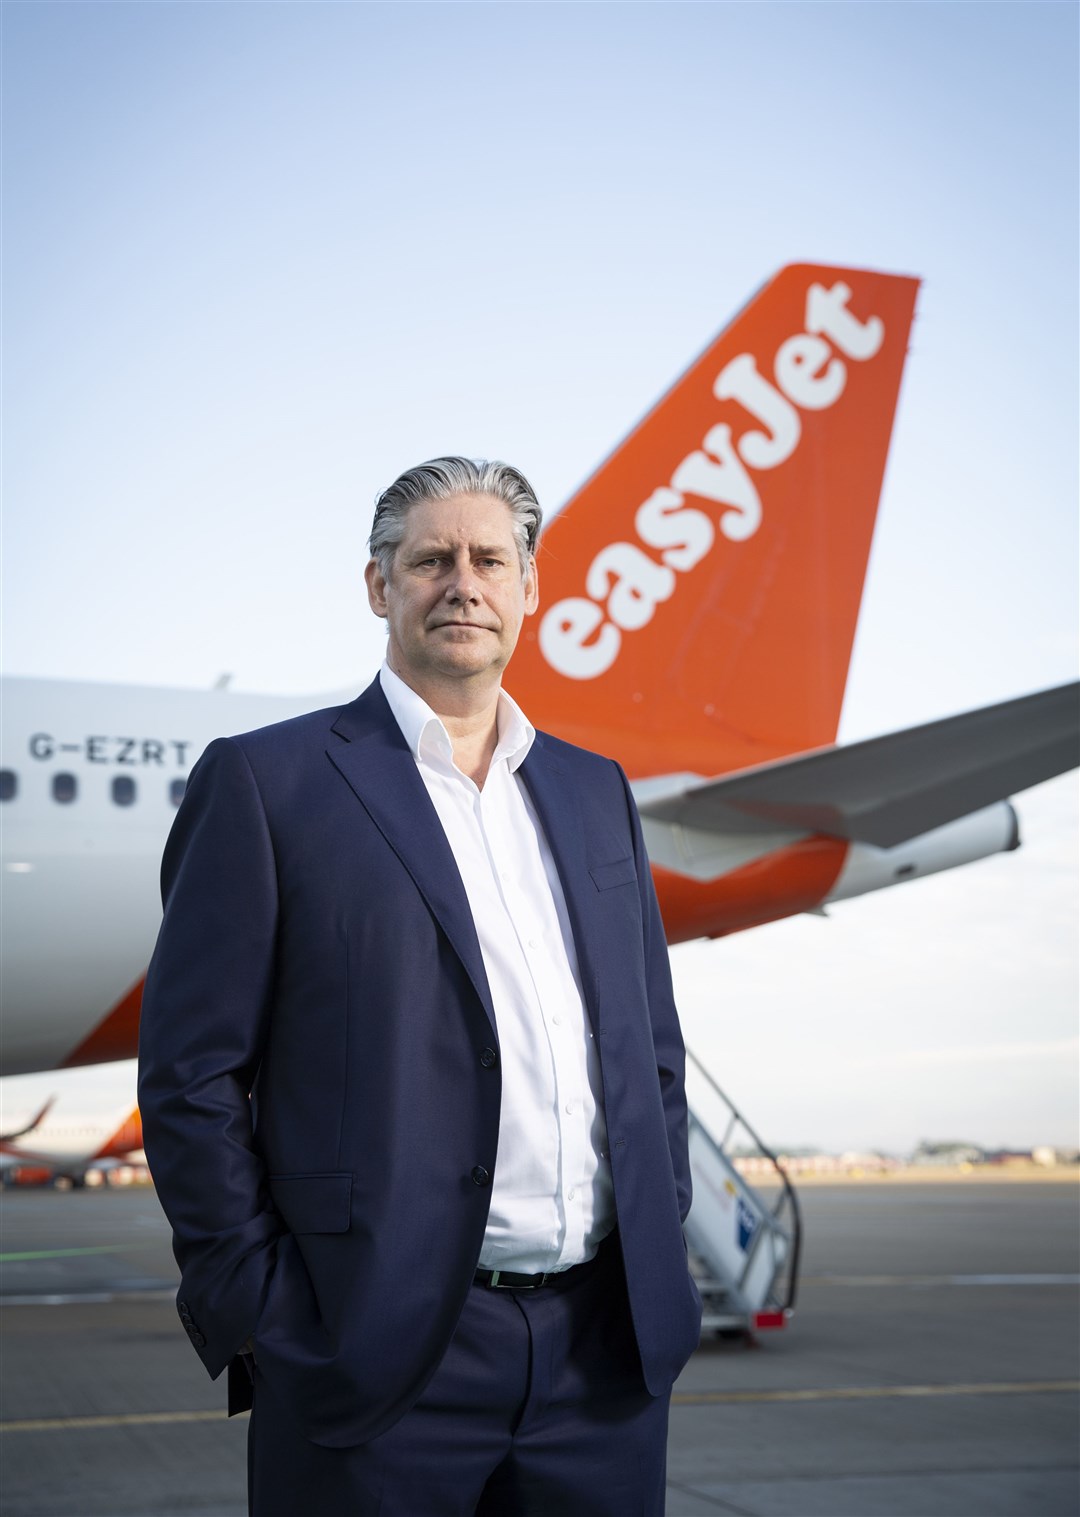 EasyJet chief executive Johan Lundgren said the airline still provides ‘great value for customers’ (Matt Alexander/PA)